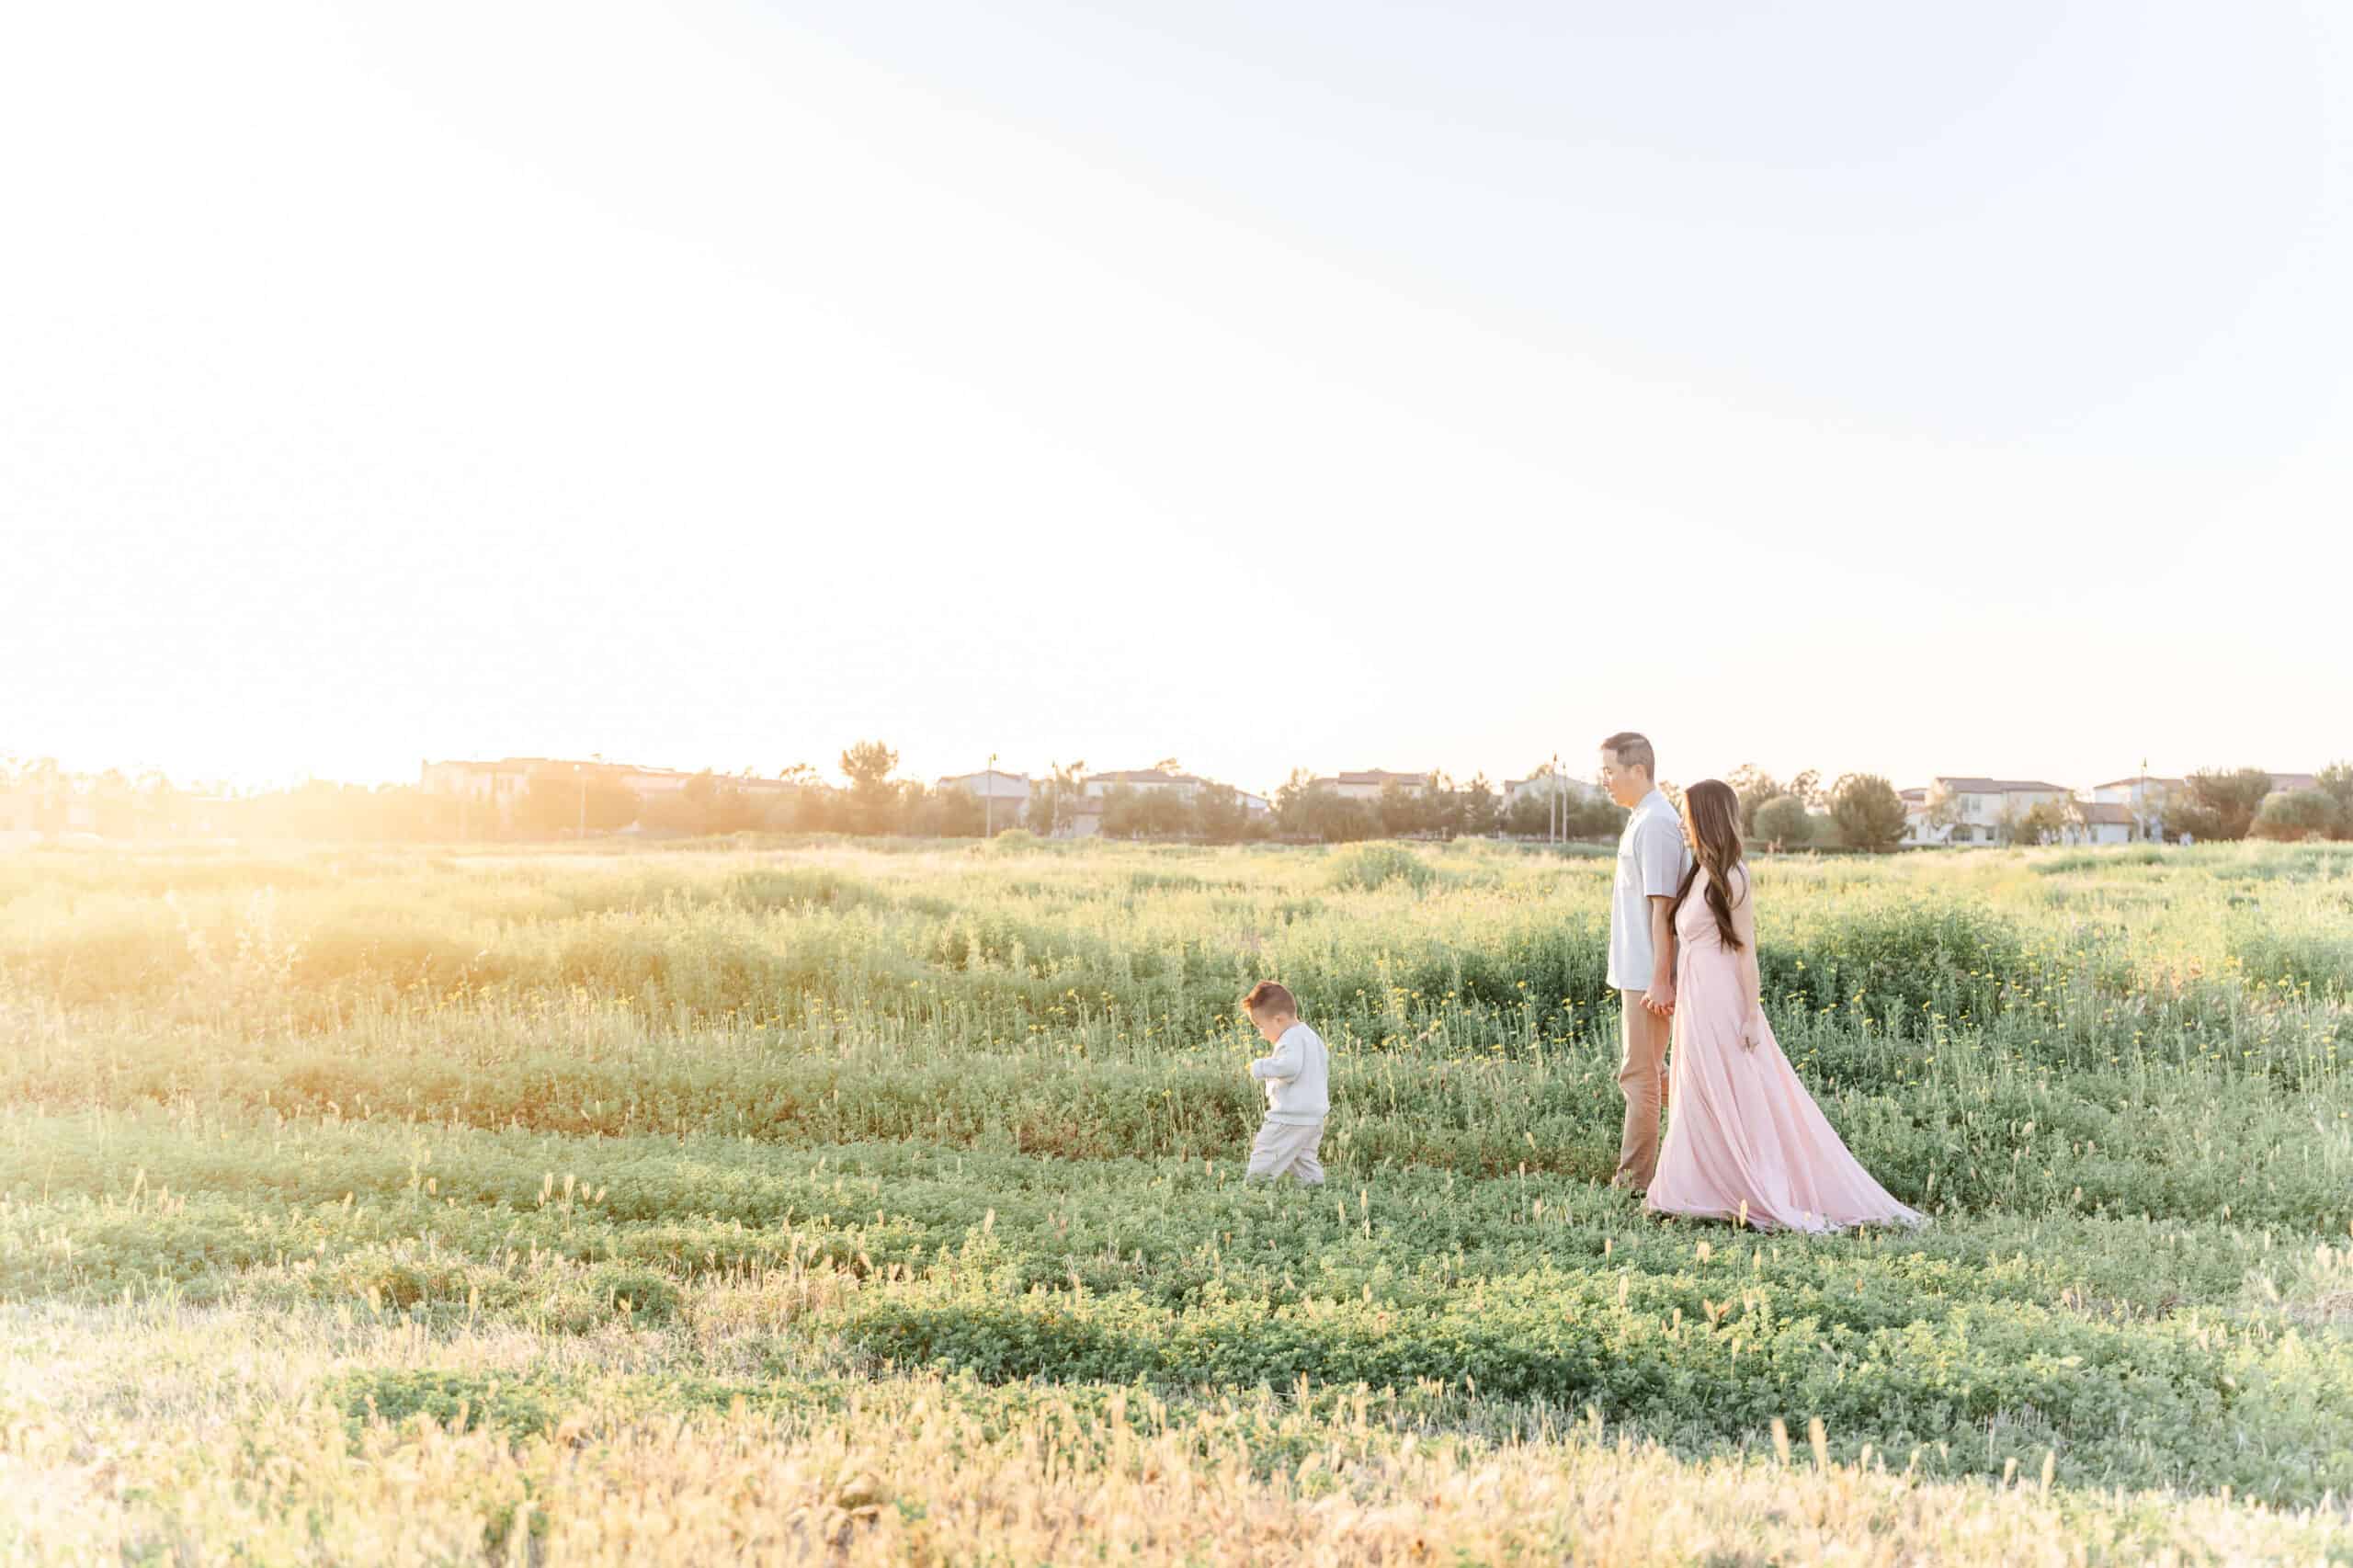 Mom in pink dress and dad walking behind toddler child in a field